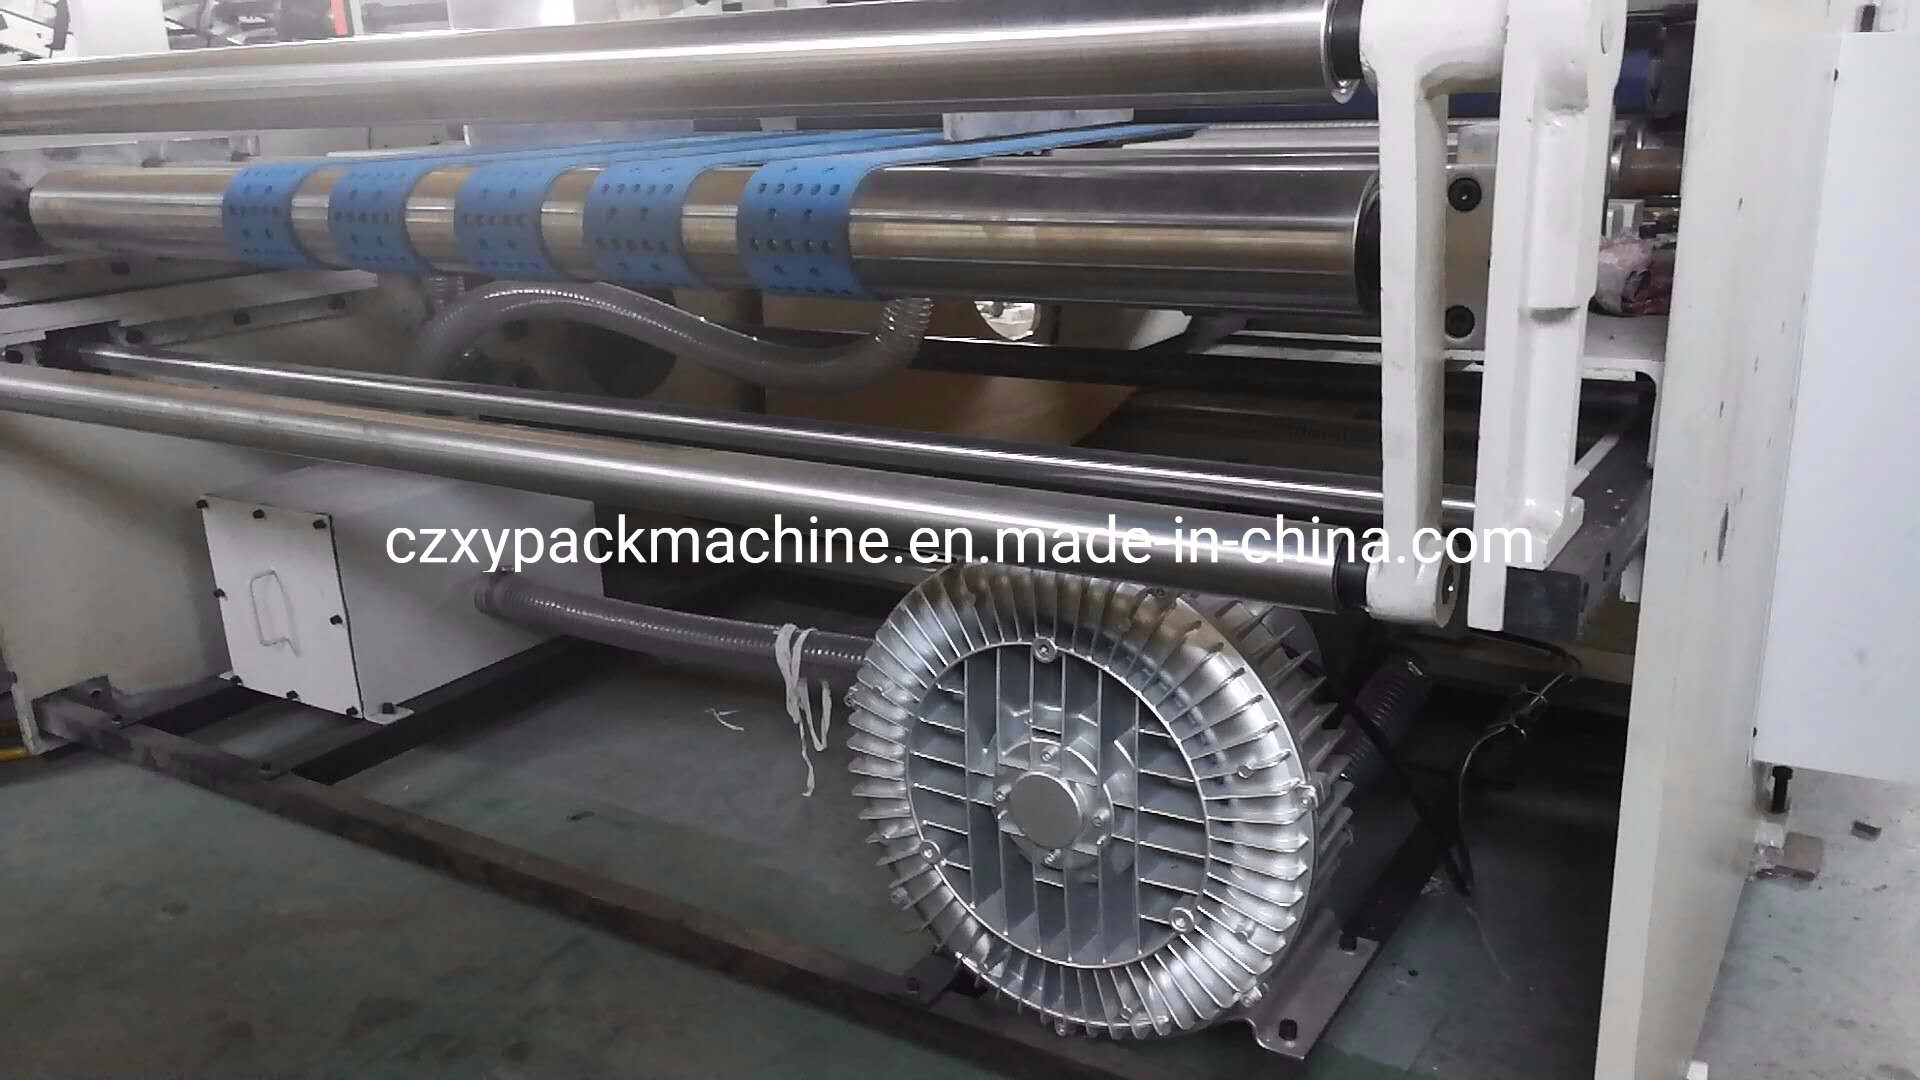 Multi-Functional Flute Laminator Machine for 3ply and 5ply Corrugated Box Production